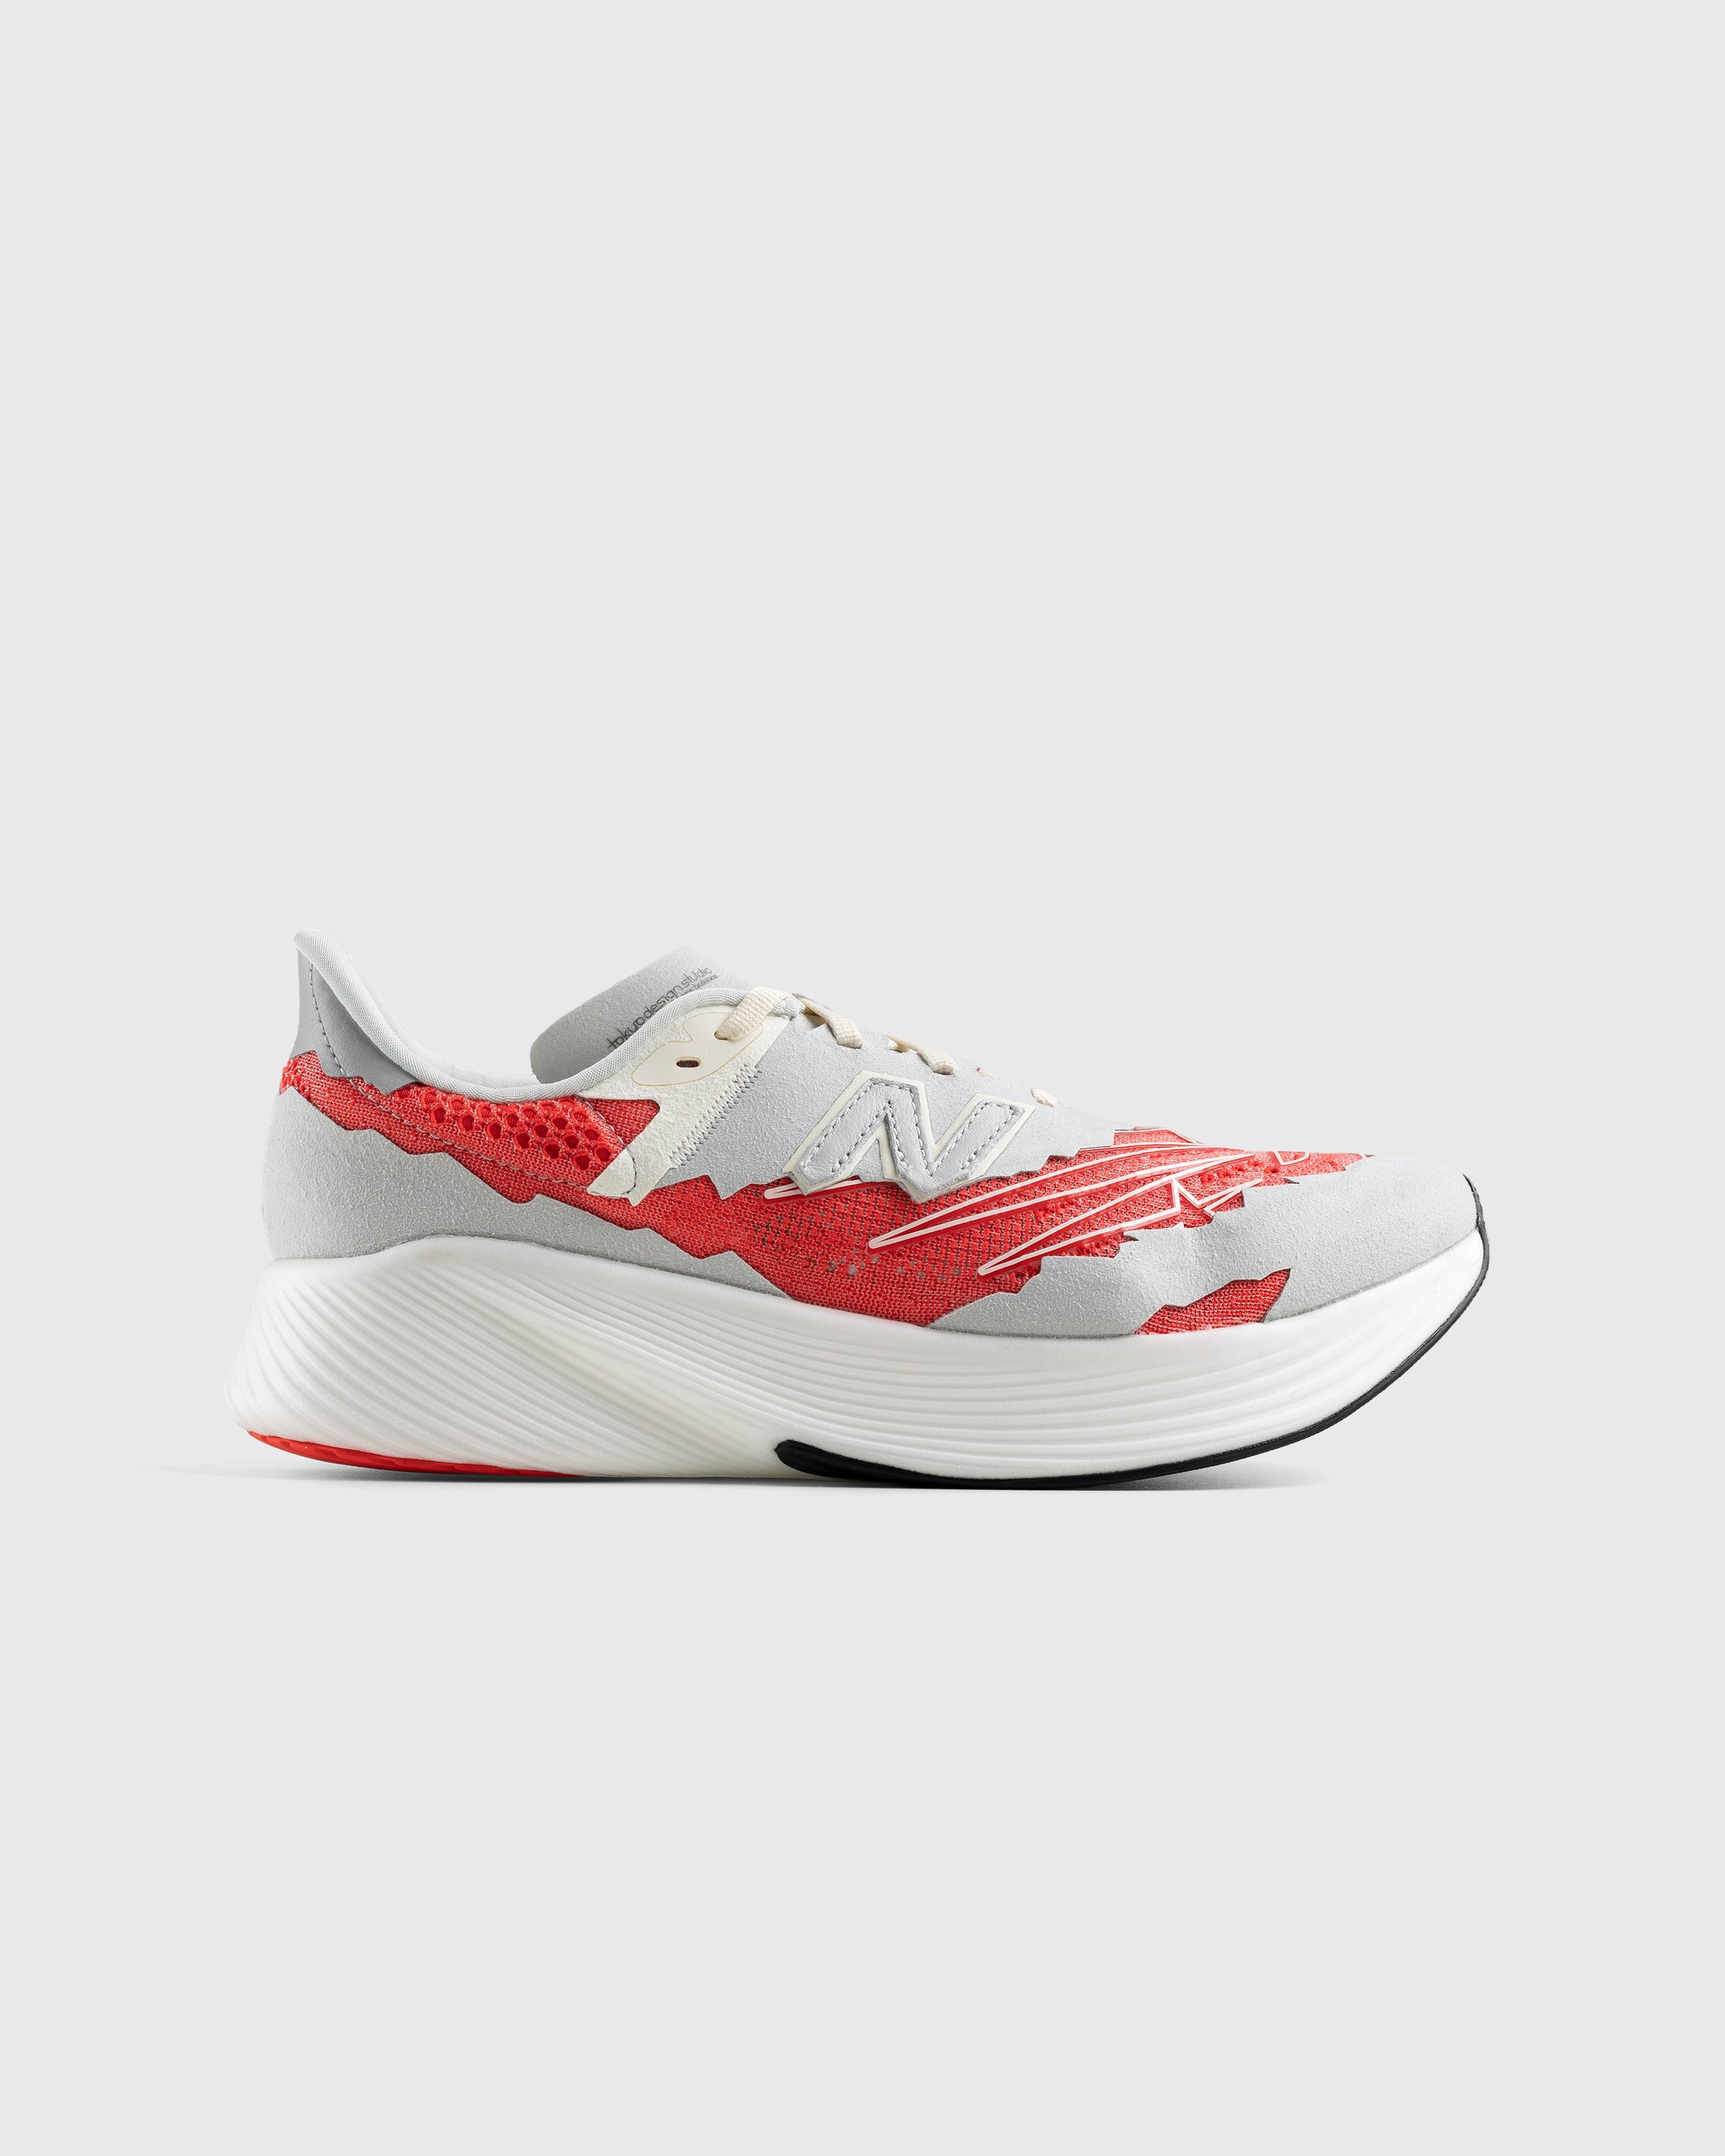 New Balance x Stone Island - FuelCell RC Elite v2 Neo Flame - Footwear - Red - Image 1